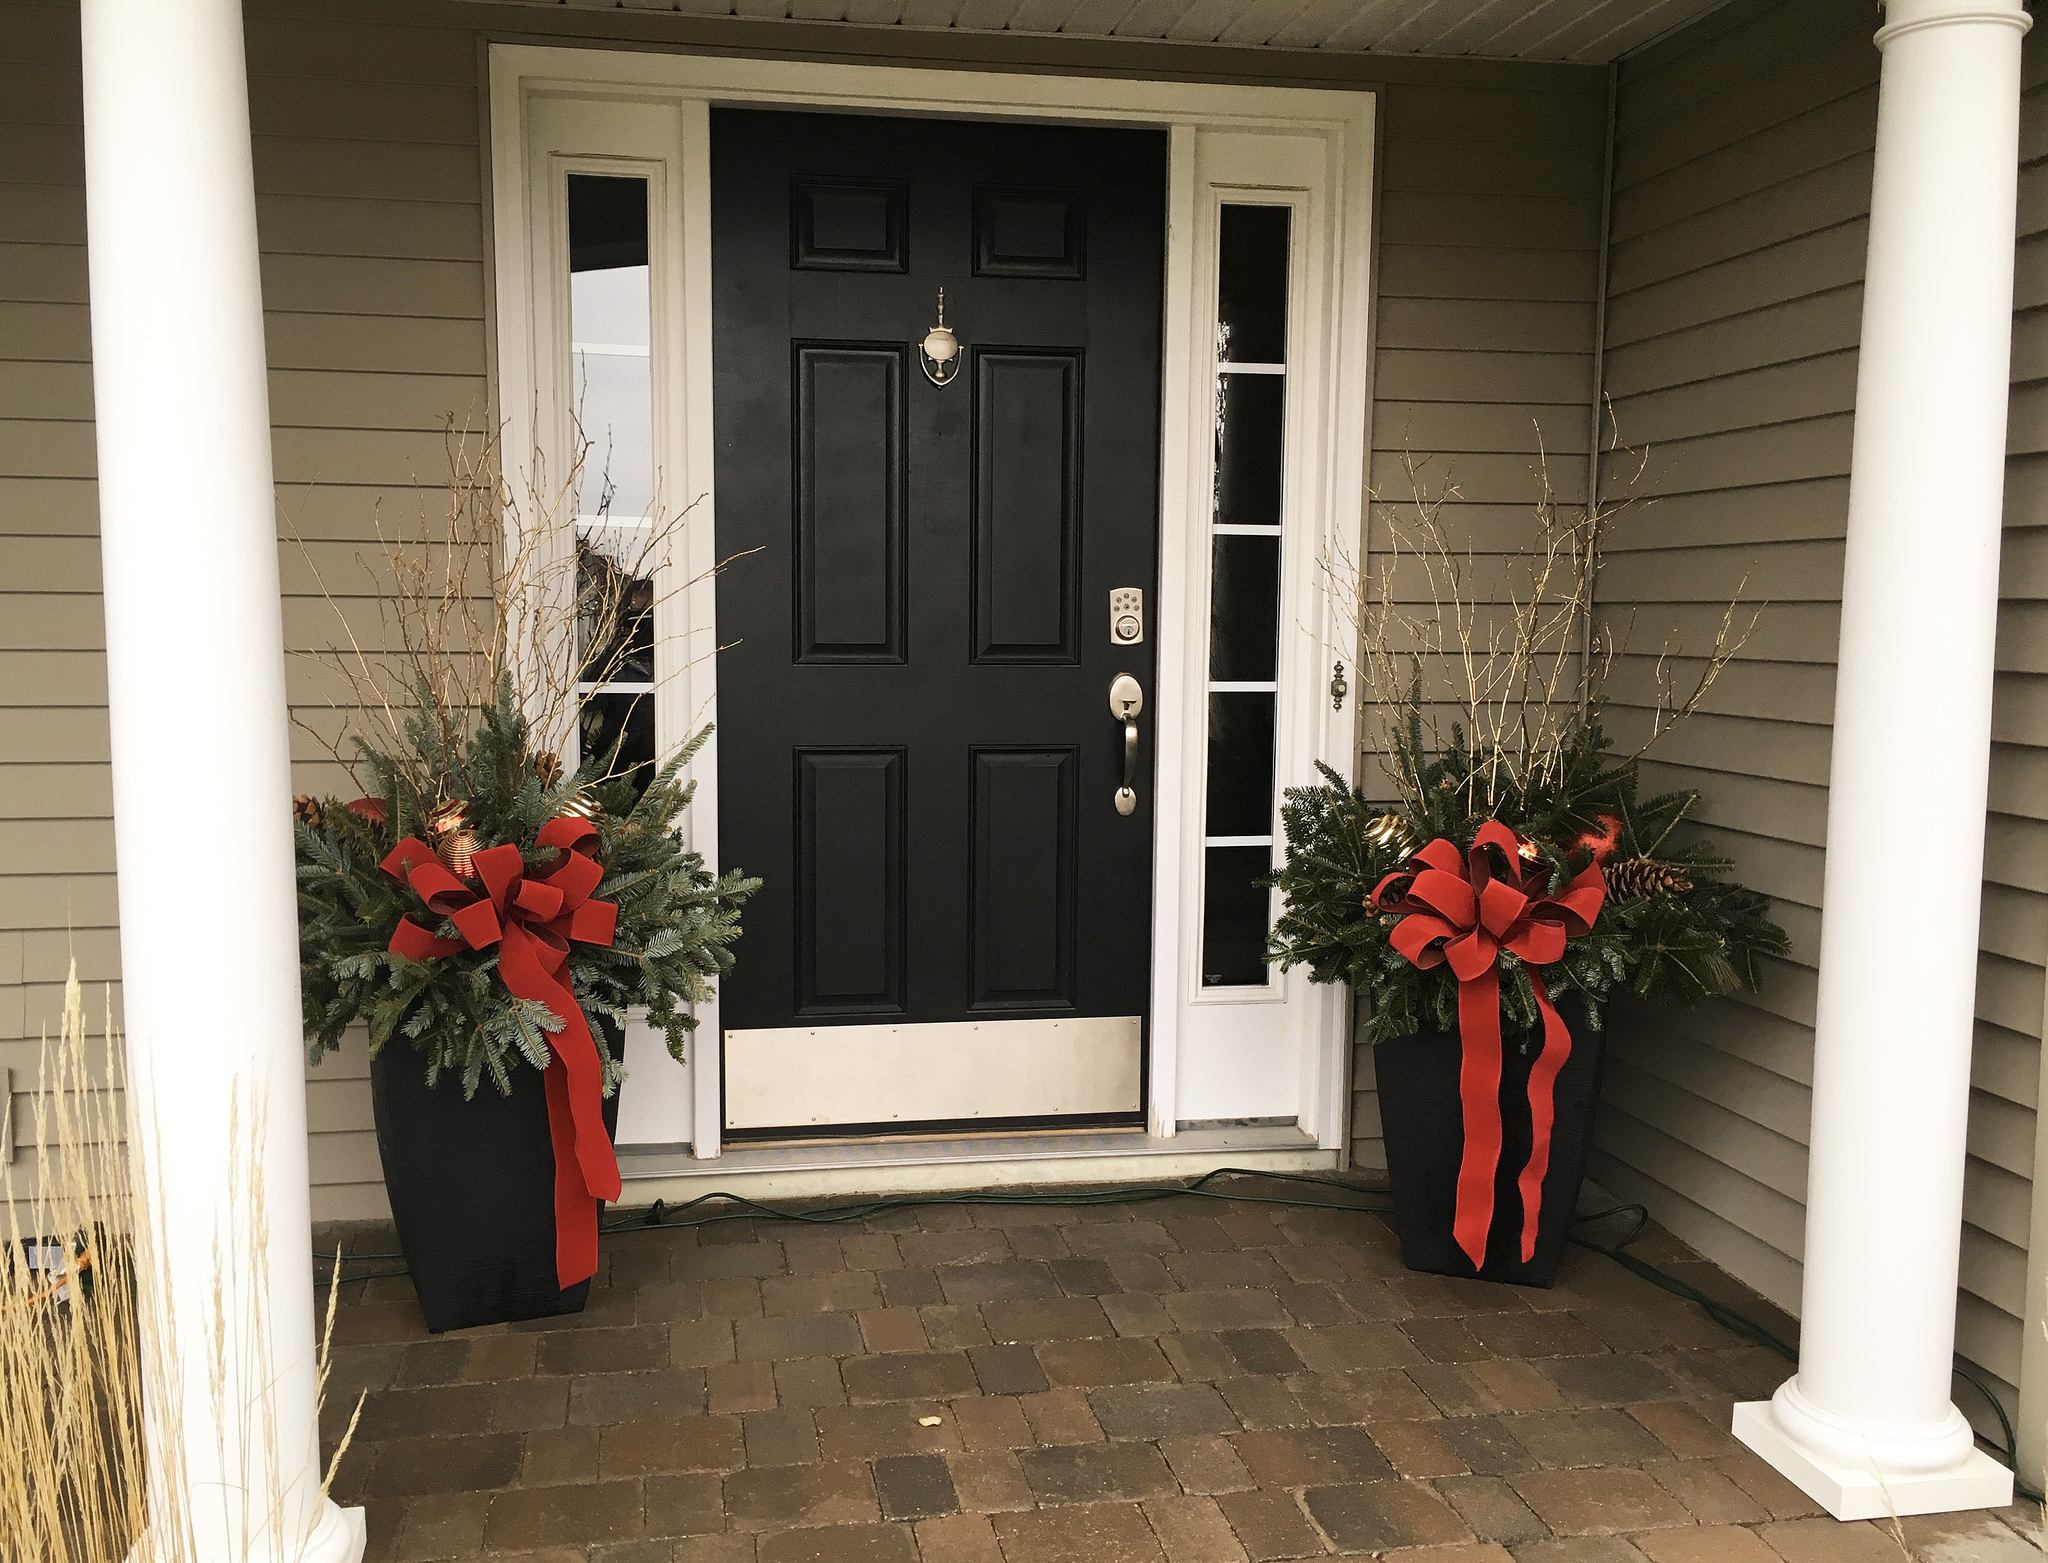 Holiday Container Gardens 2019